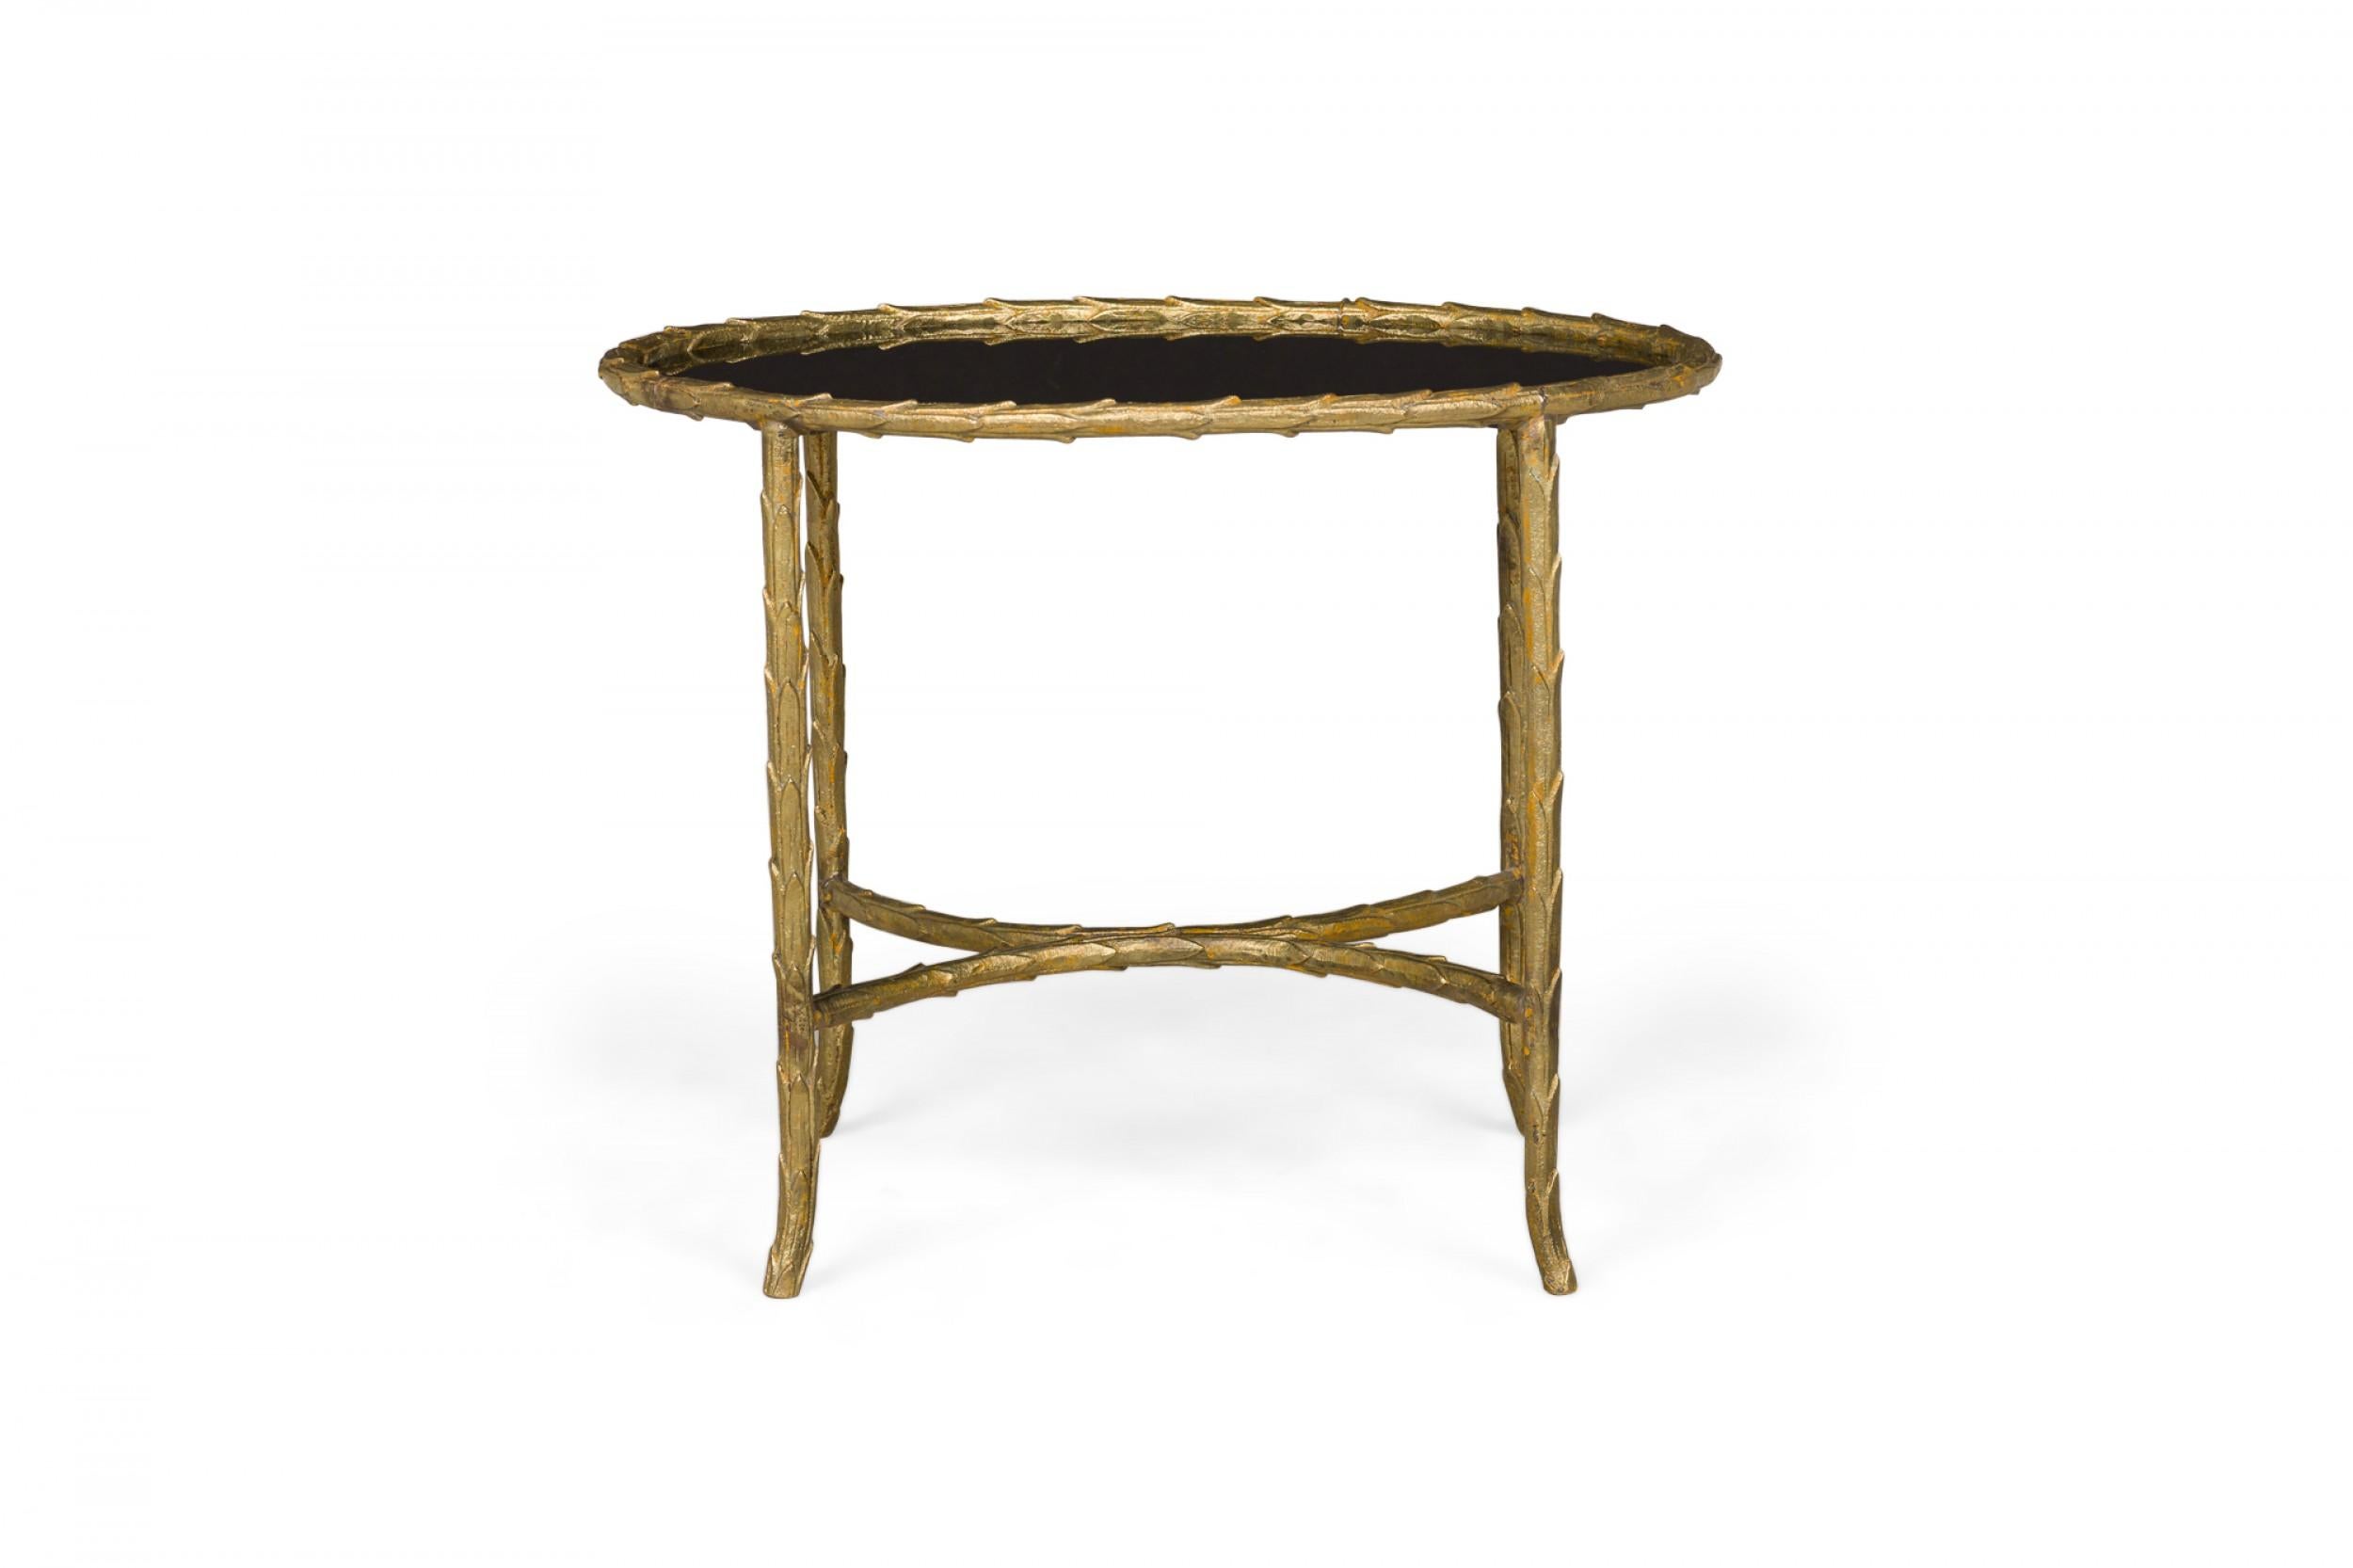 Art Deco French oval-shaped end / side table with an opaque black glass top inset into a molded bronze frame in faux bamboo form with opposing demilune stretchers, standing on four legs with slightly curved feet.